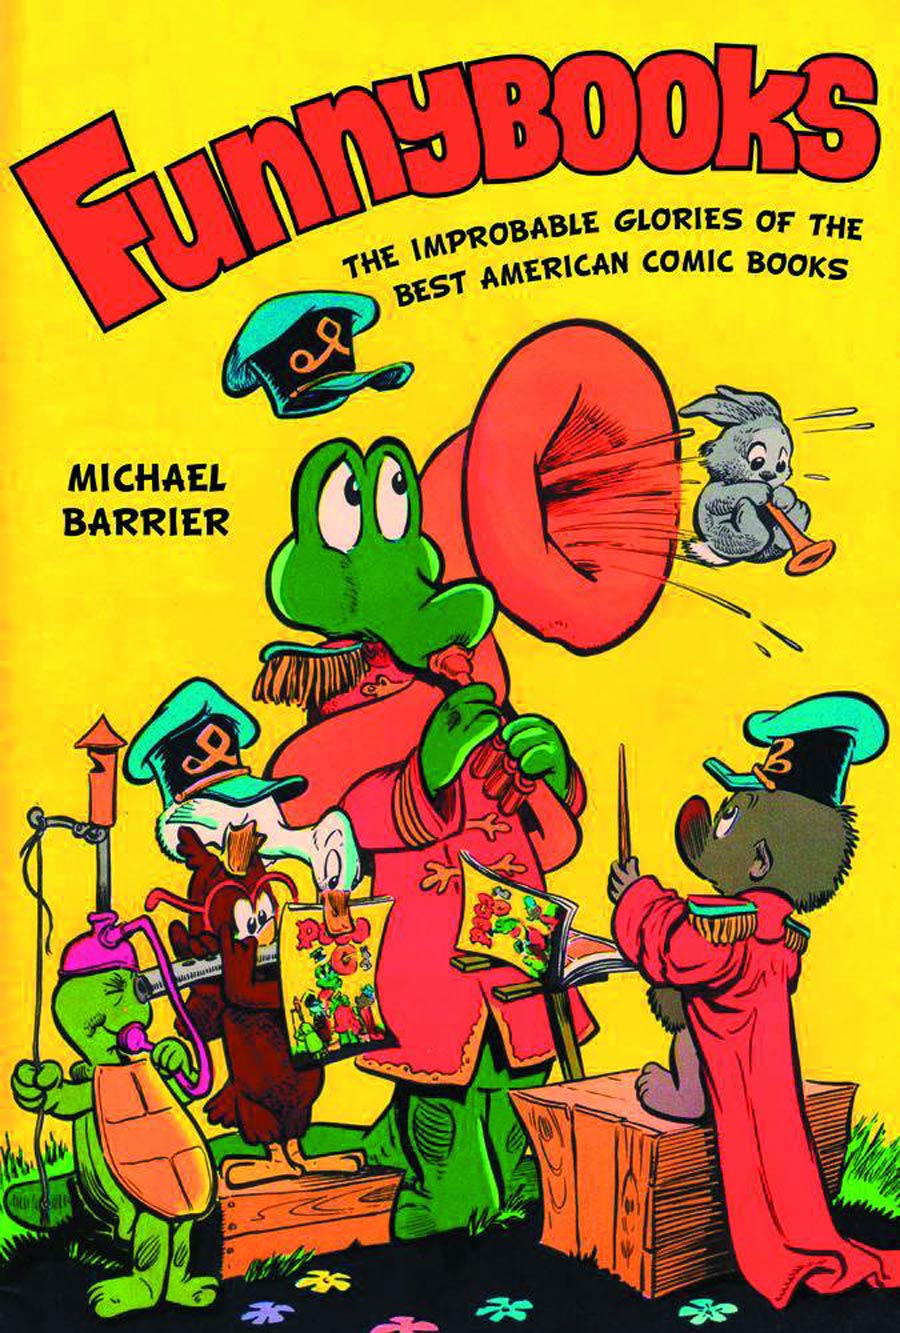 Funnybooks Improbable Glories Of The Best American Comic HC